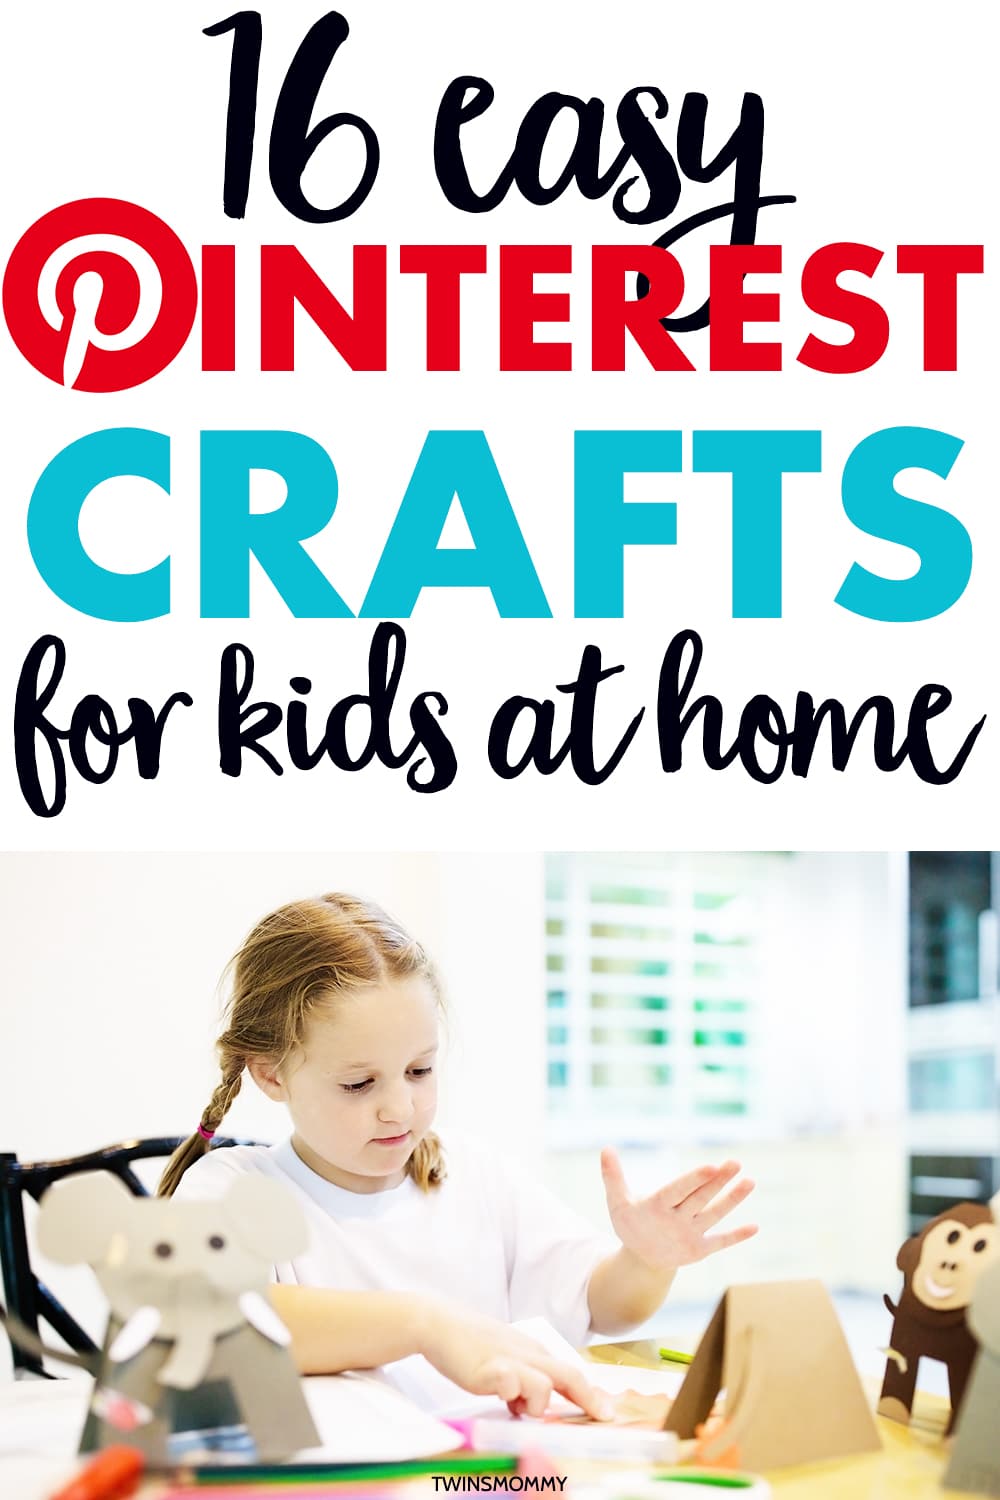 16 Pinterest Crafts for Kids to Do At Home